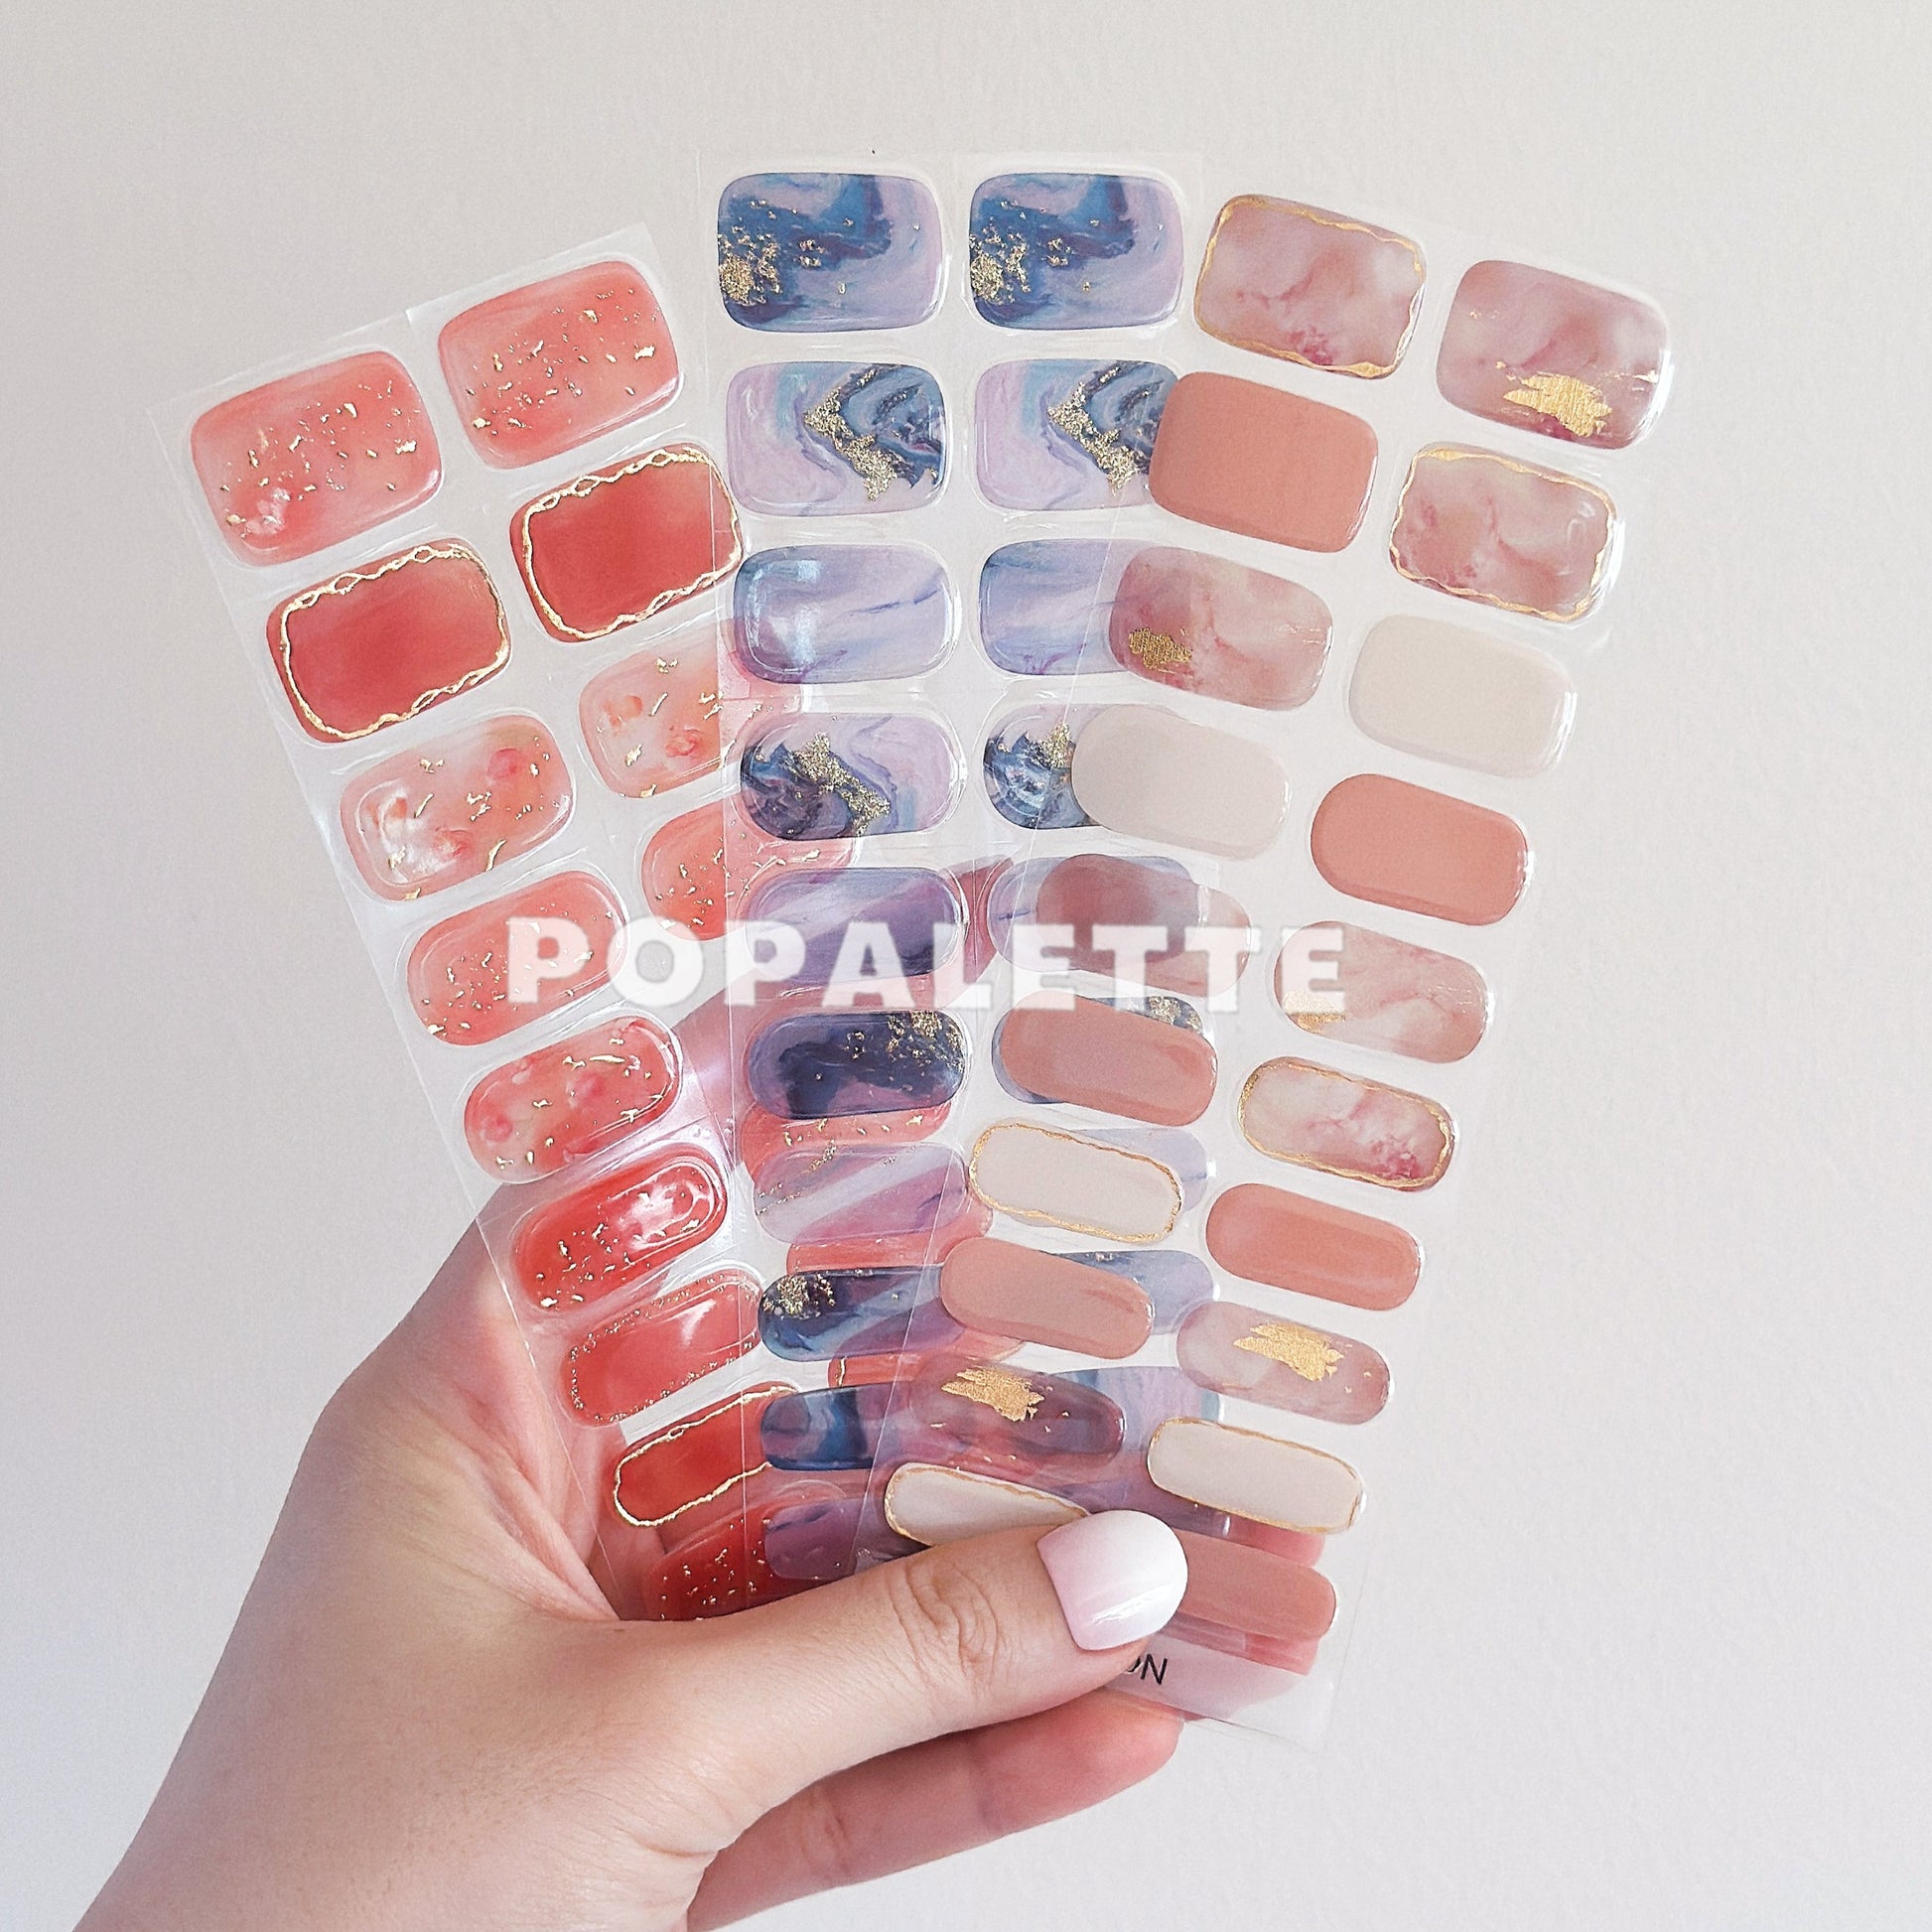 MARBLE NAIL COLLECTIONS (MARBLE ROSE GOLD) - SEMI-CURED GEL NAIL STICKERS 20 STRIPS